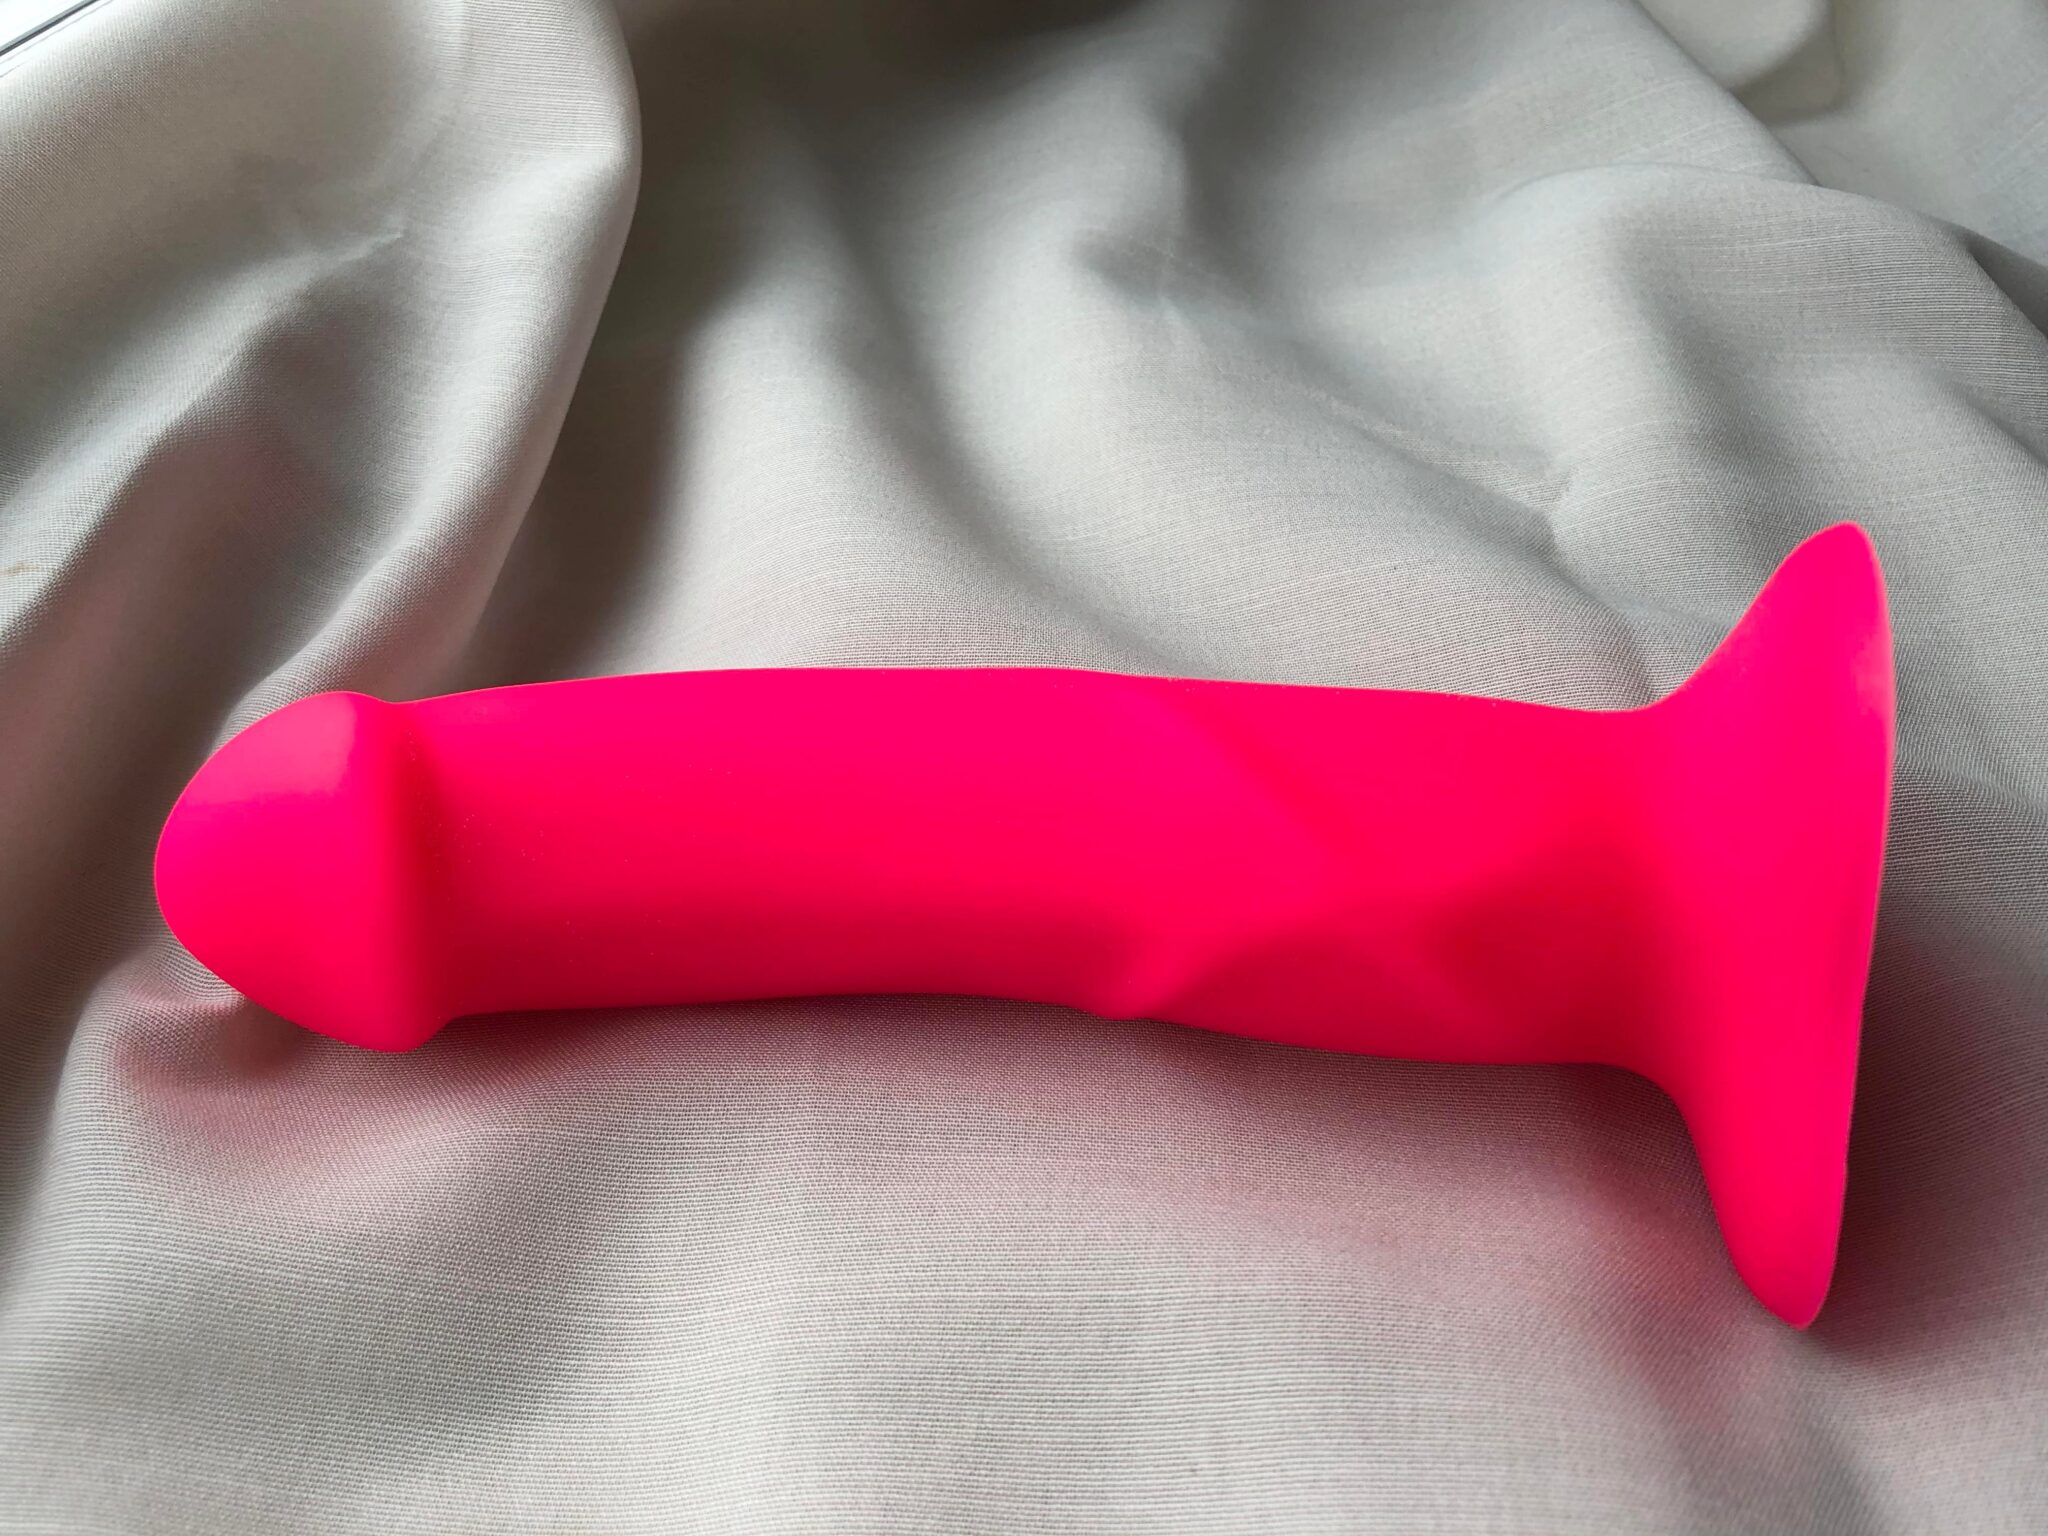 Fun Factory The Boss Pink Silicone Dildo. Slide 10